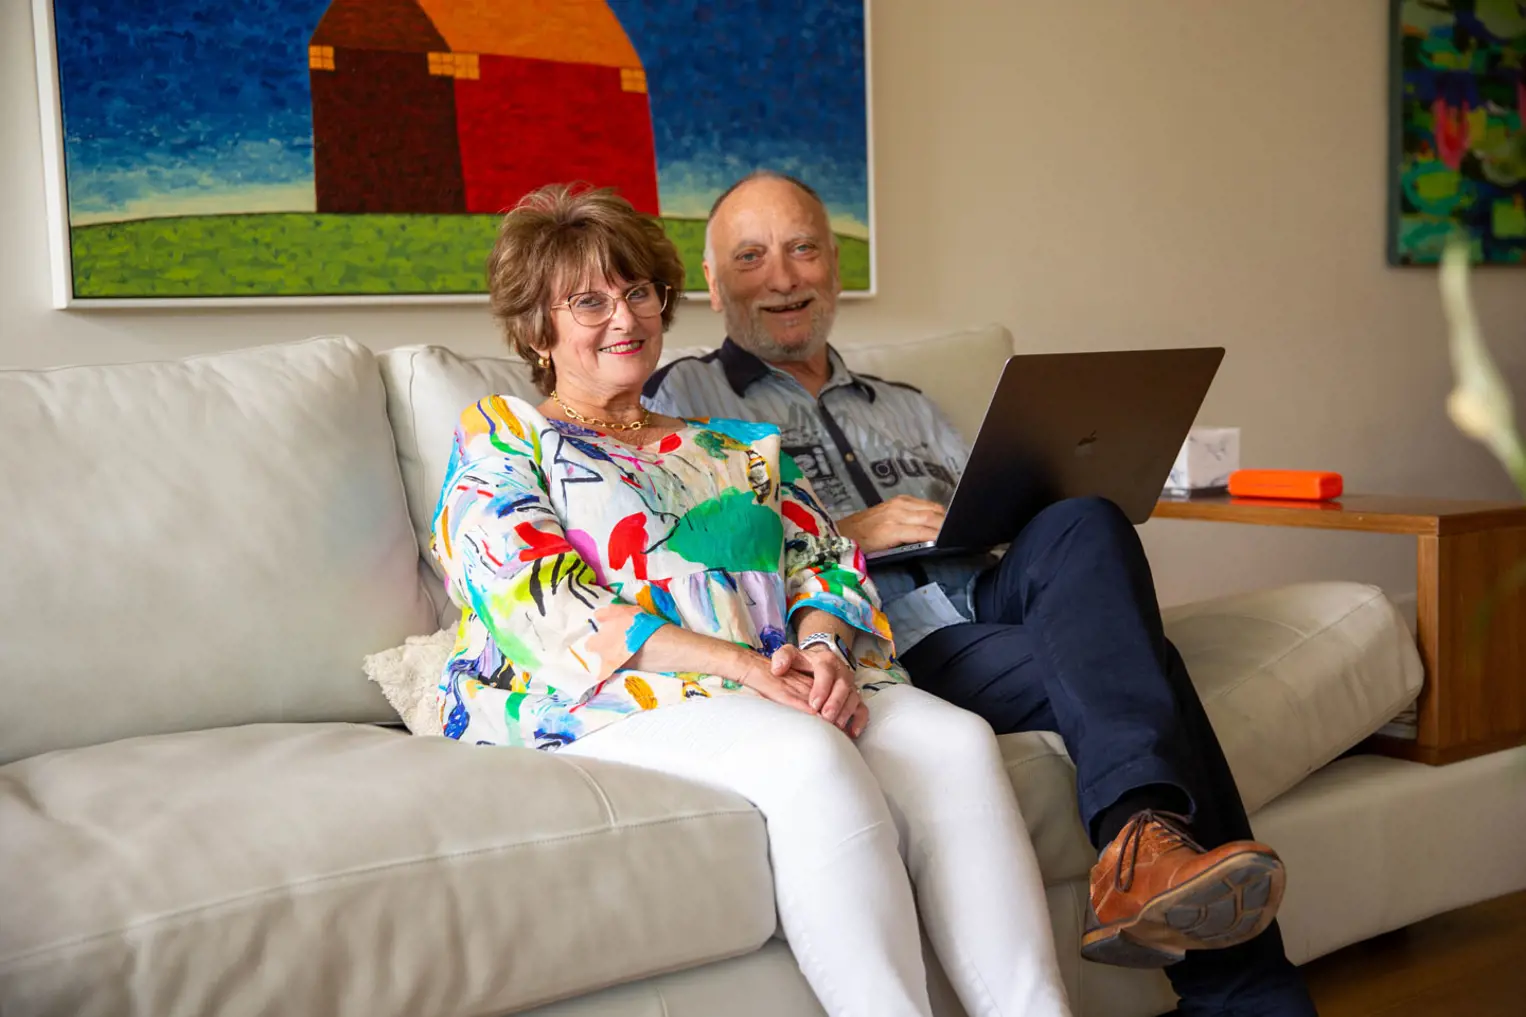 Photo of BCNA Member Harry, who has a white beard, with his wife Yvonne, who has auburn hair and is wearing a multicoloured shirt. They are sitting on a cream sofa. Harry has a laptop on his knees, and they are both smiling